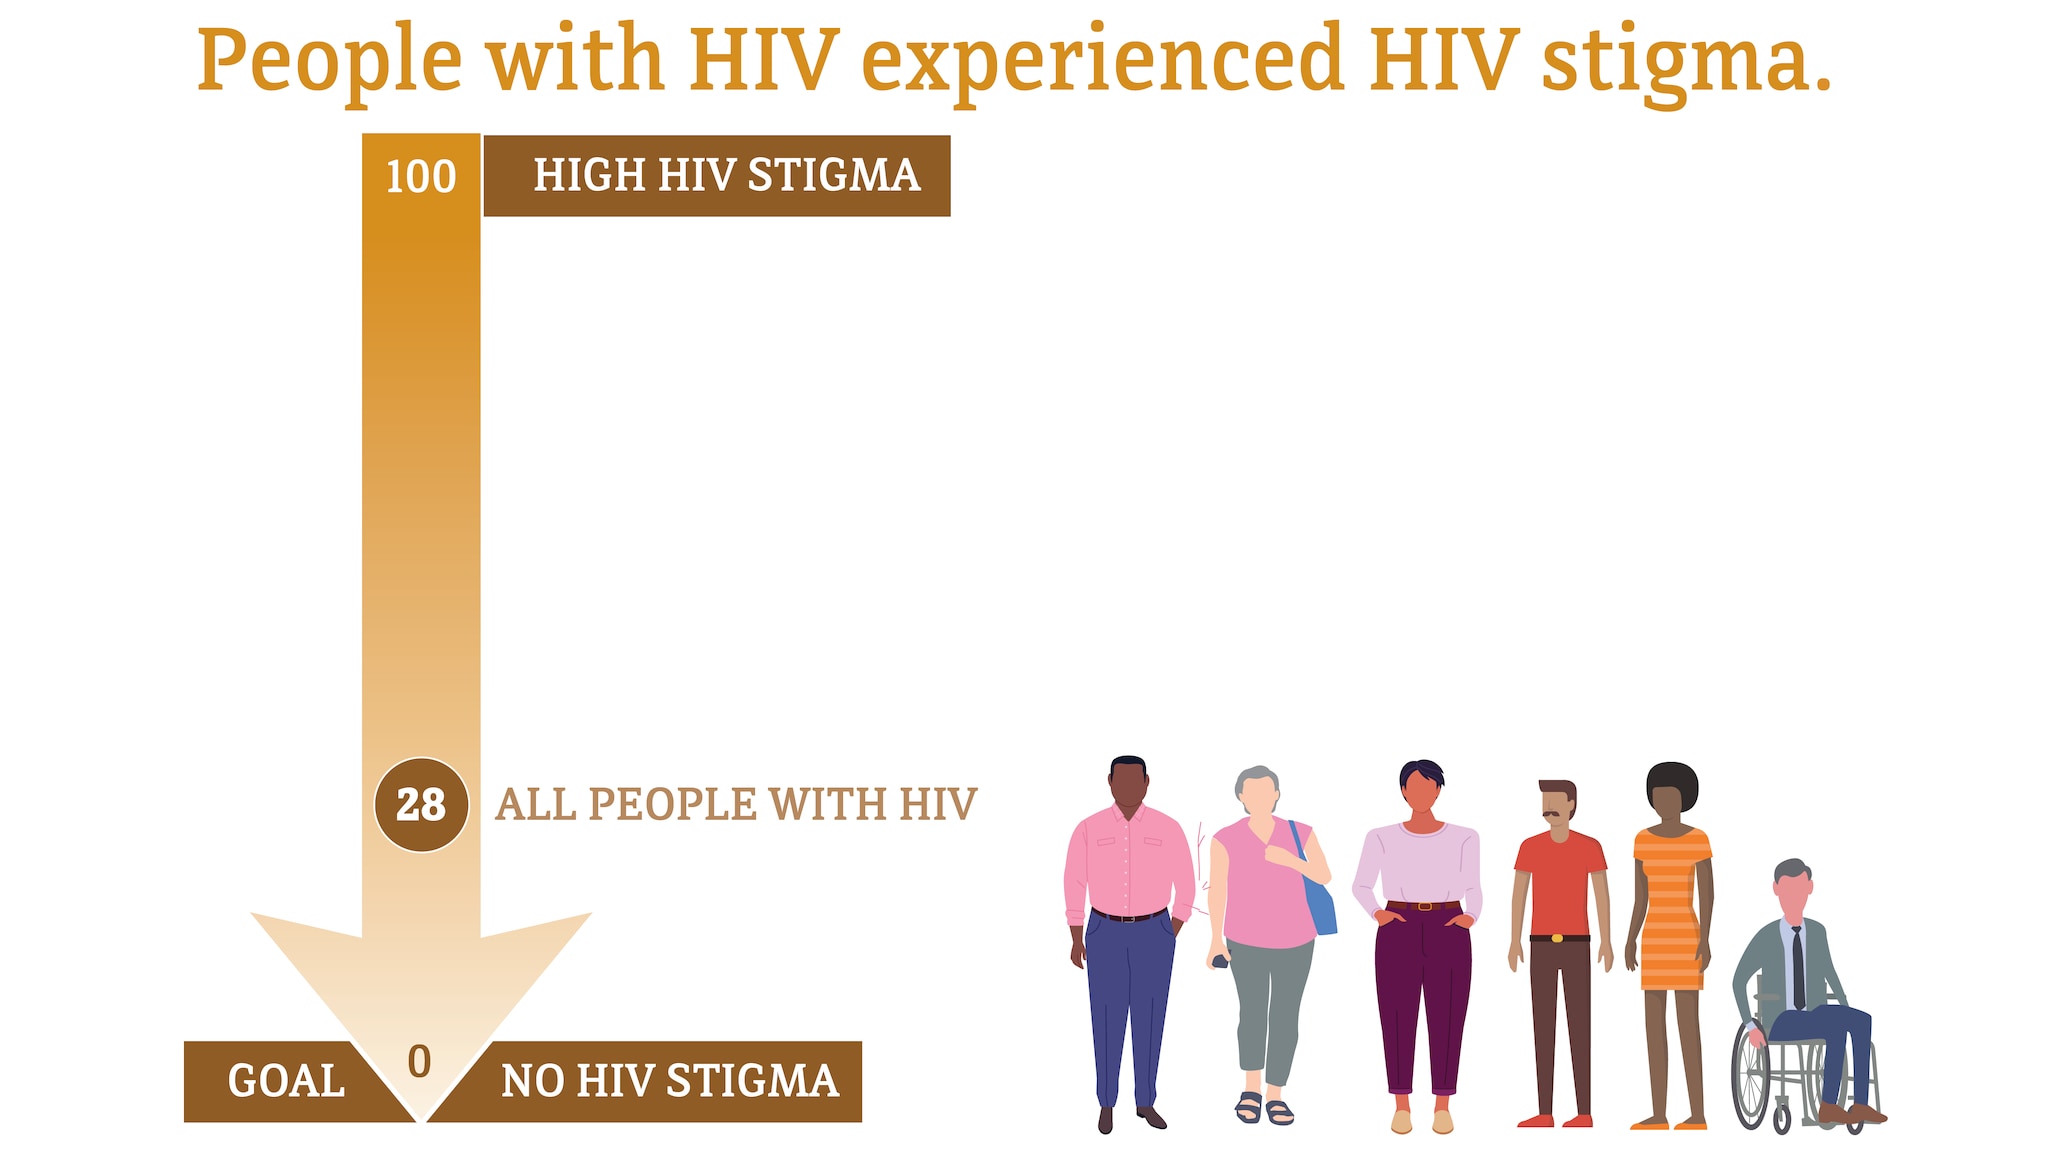 People with HIV experienced HIV stigma. On a scale of 1 to 100, with 100 representing high HIV stigma and 0 representing no HIV stigma, all people with HIV had a score of 28. The goal is 0 for all populations.